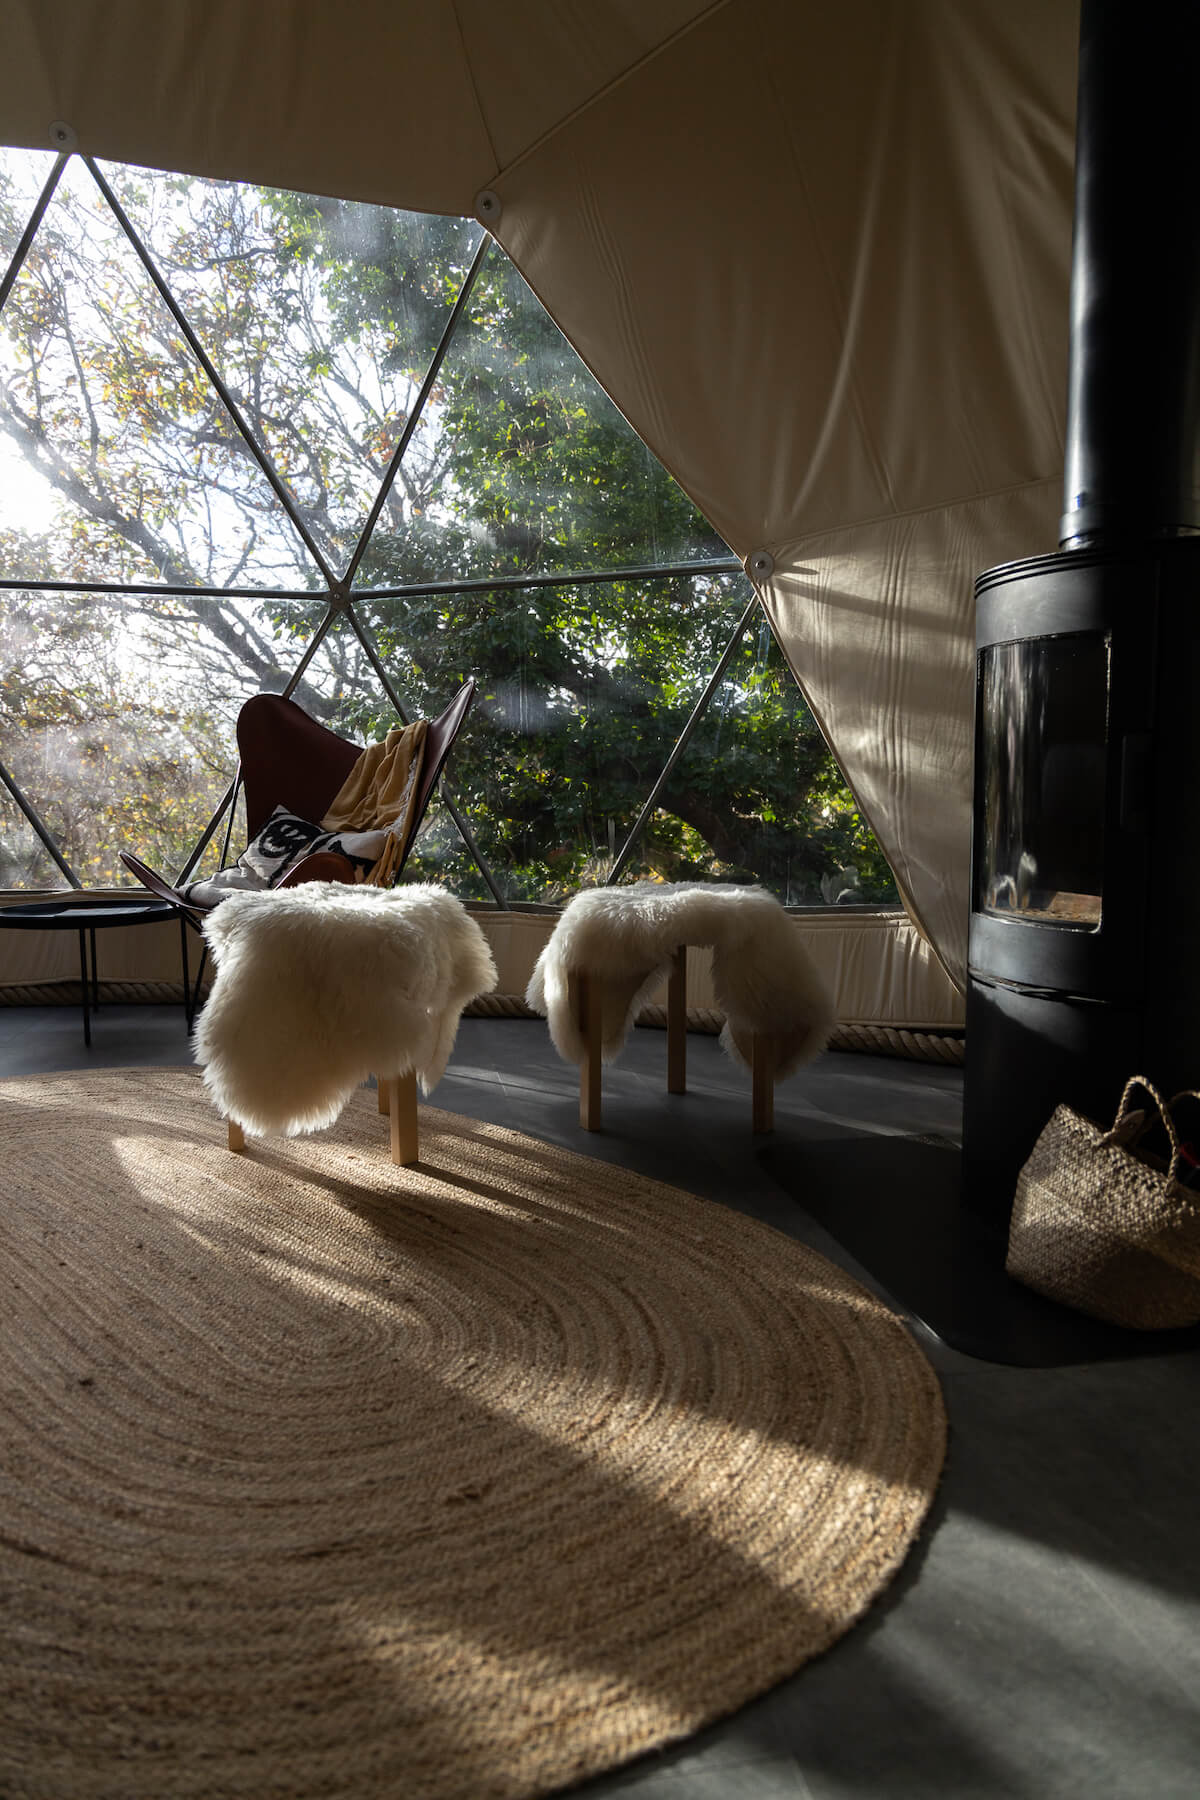 inside of geodesic dome with a stove, a chair and a window